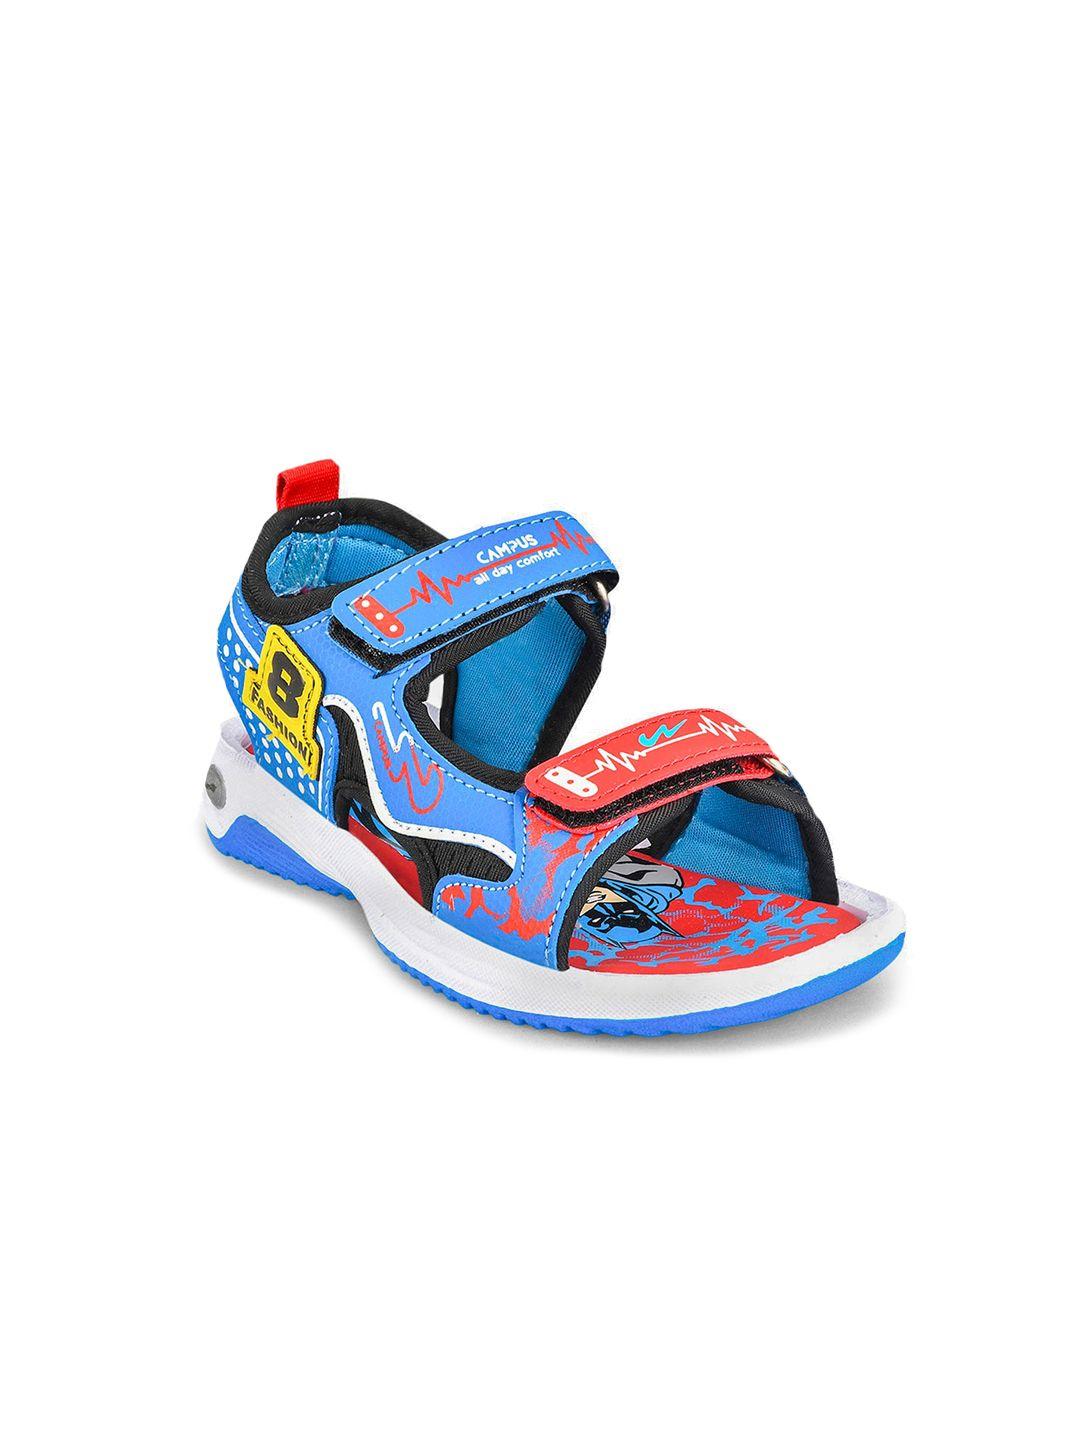 campus-kids-patterned-sports-sandals